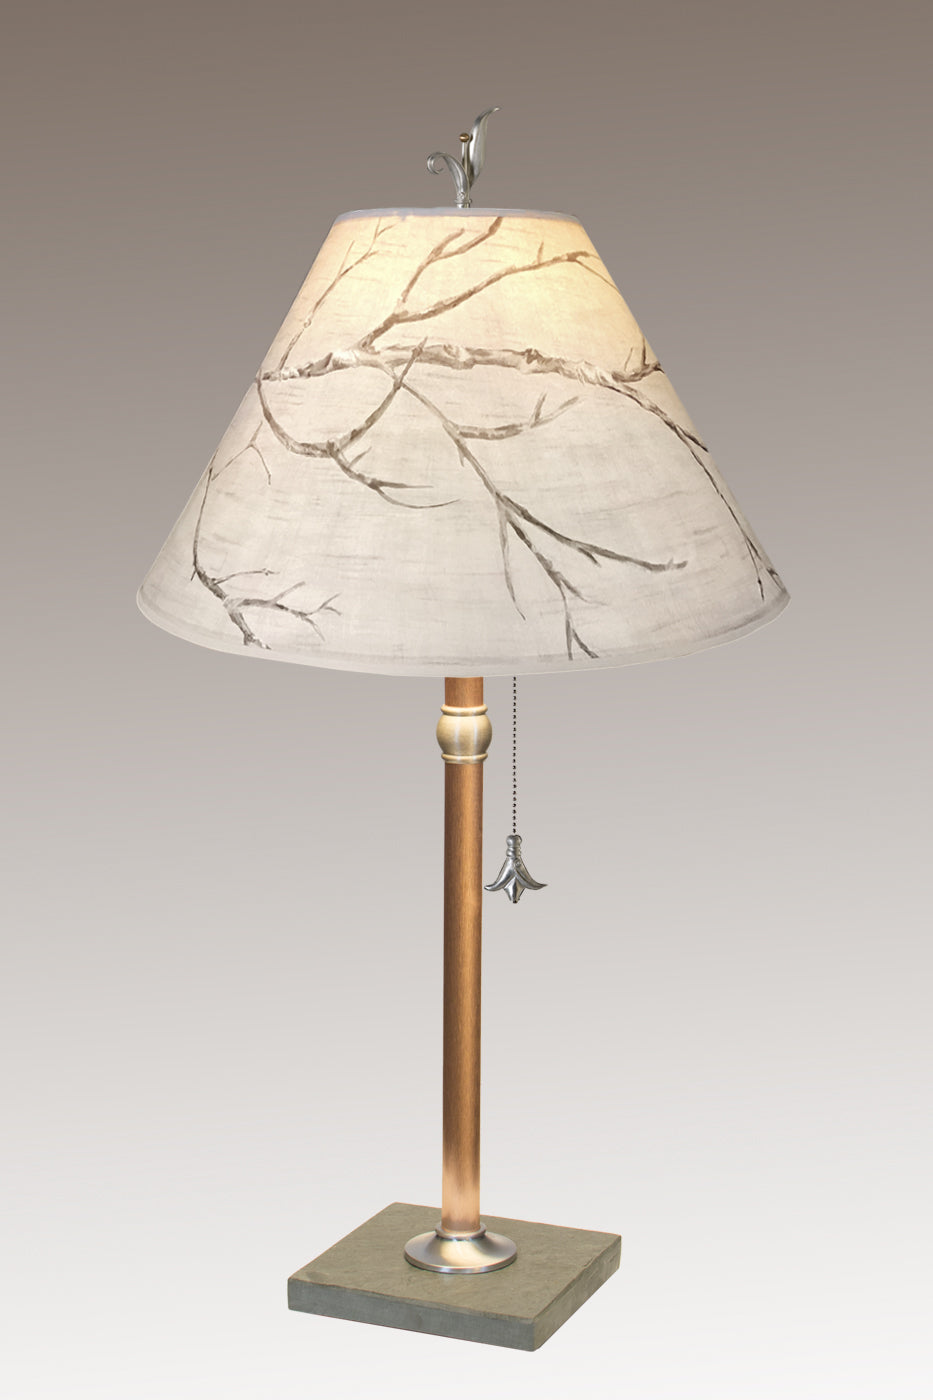 Janna Ugone & Co Table Lamps Copper Table Lamp with Medium Conical Shade in Sweeping Branch